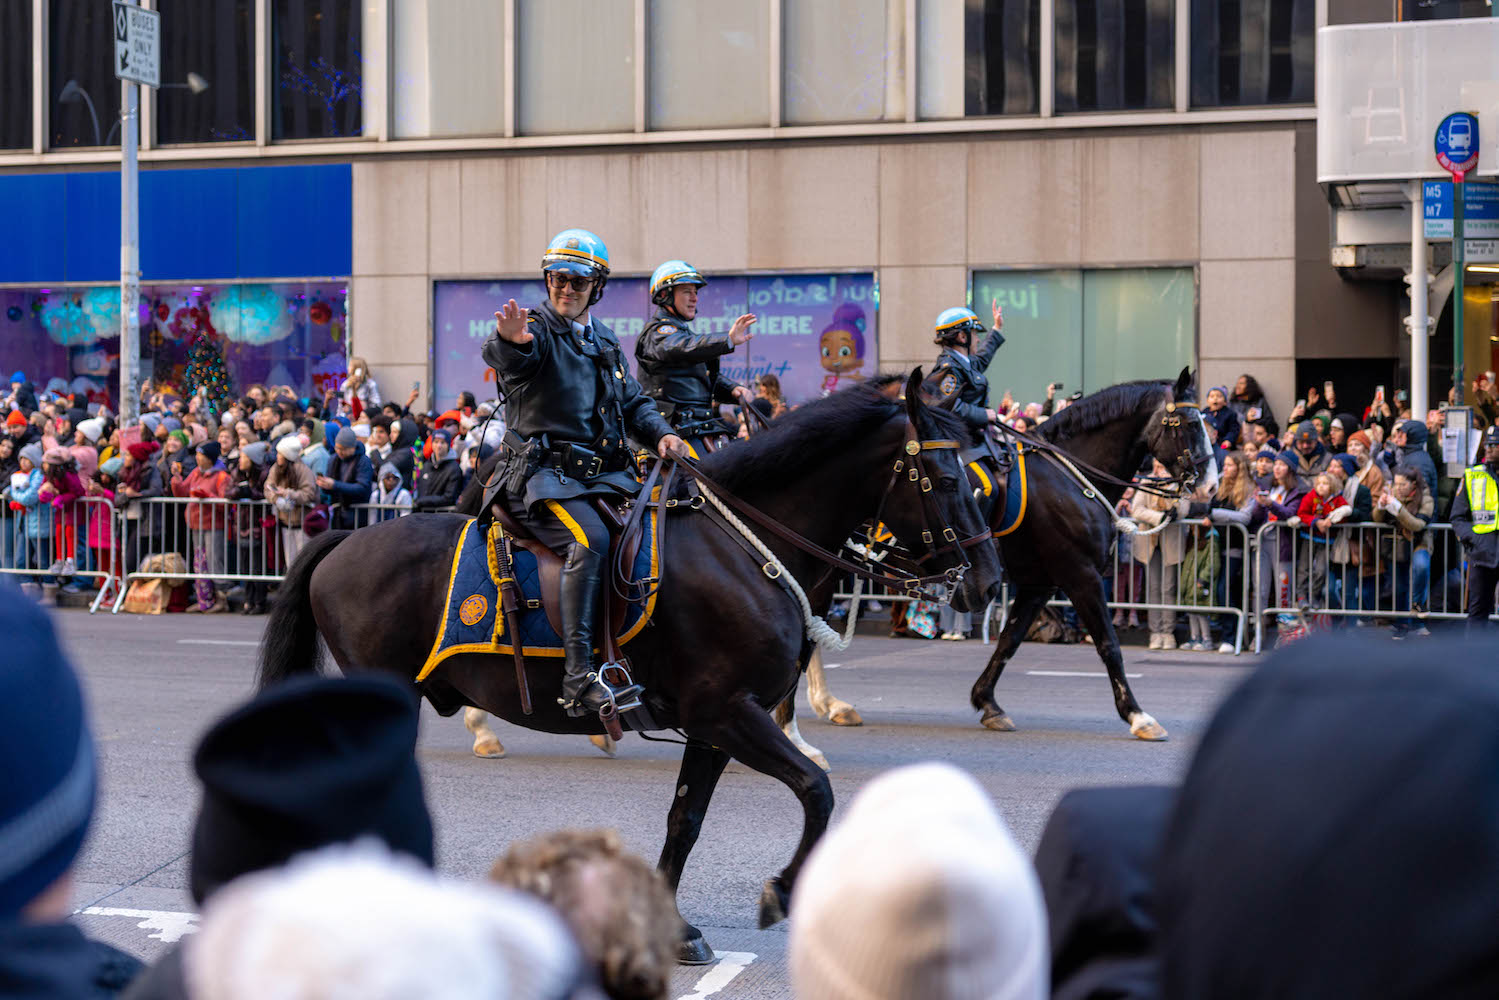 Three police officers wearing blue helmets riding horses down Sixth Avenue in Manhattan. They are waving toward the crowd who gathered behind the fences on the sidewalks